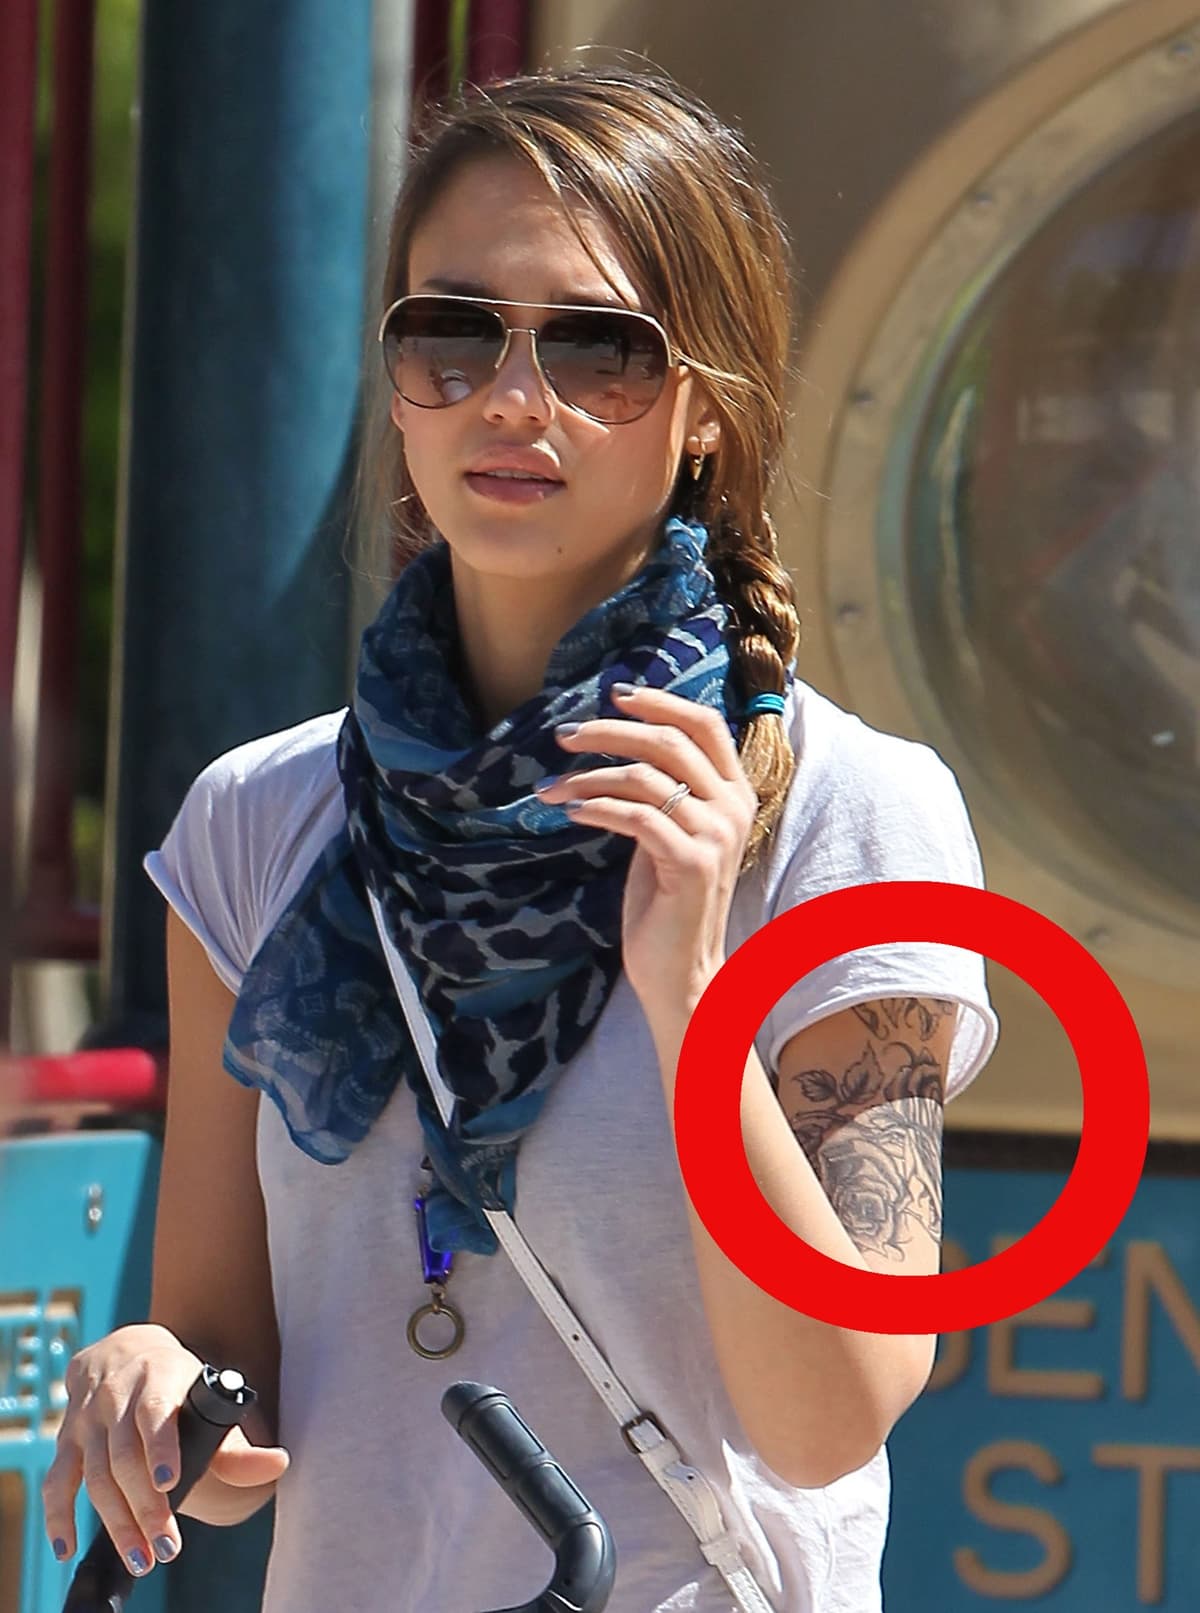 Jessica Alba with a new tattoo on her arm for a new movie role